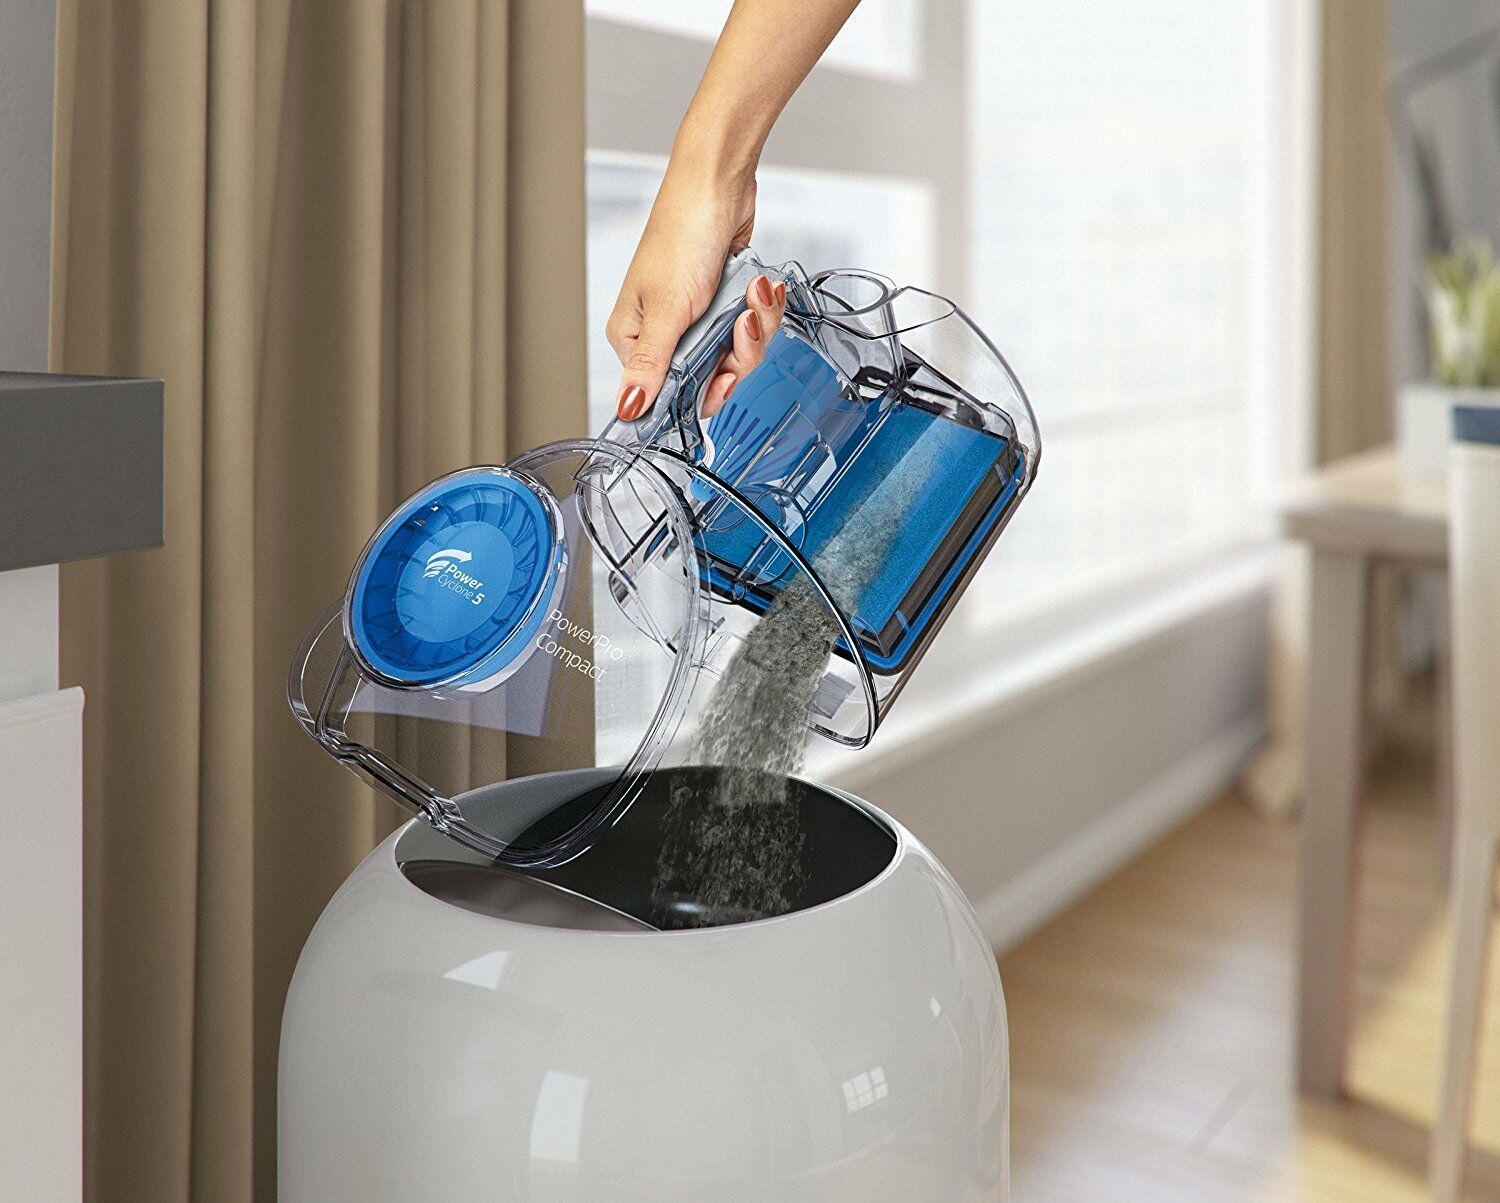 PHILIPS VACUUM CLEANER CLASS A